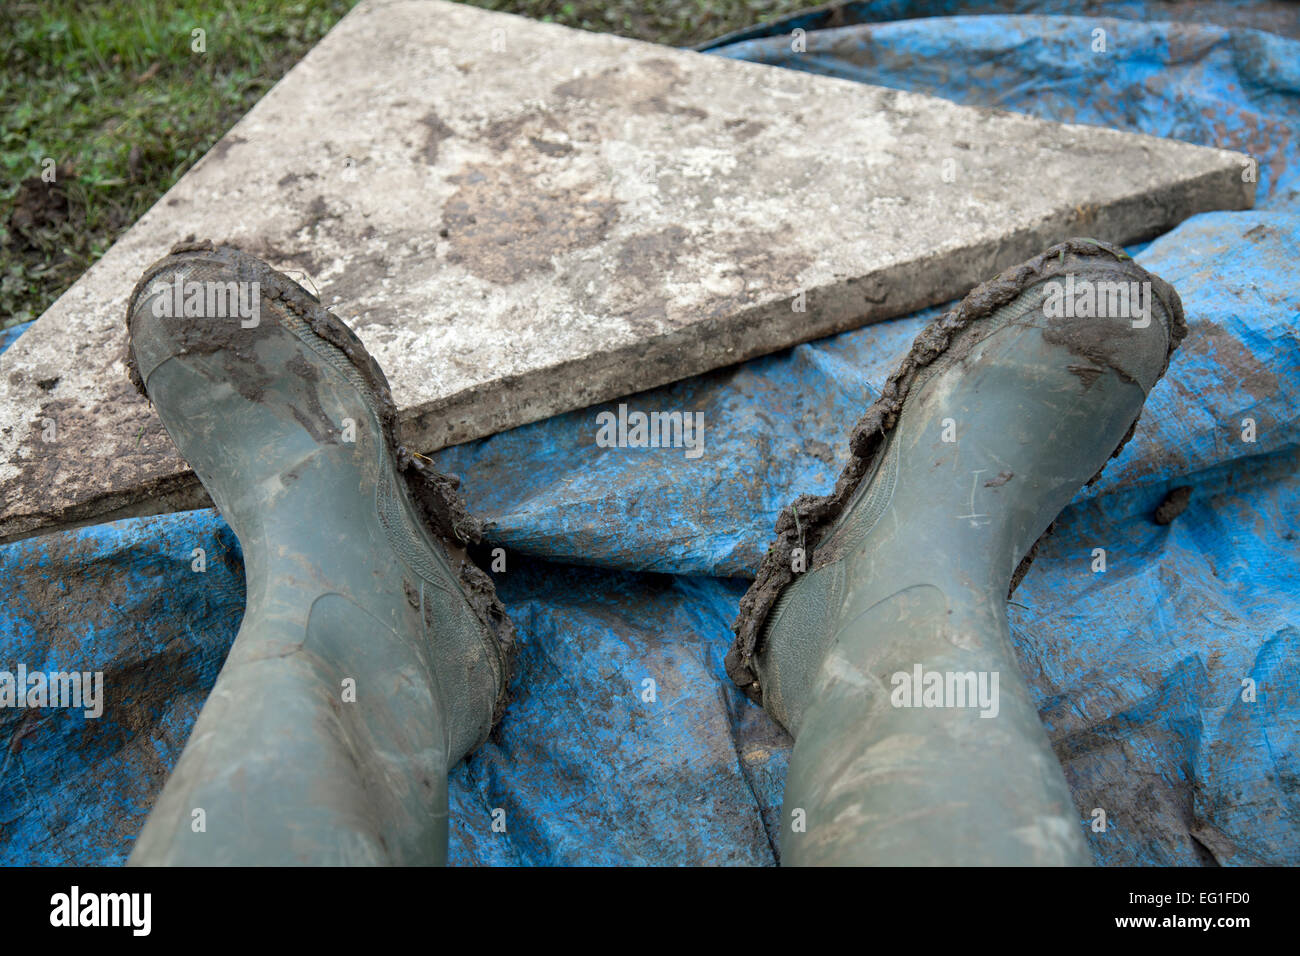 Muddy wellington boots resting on a ground sheet Stock Photo